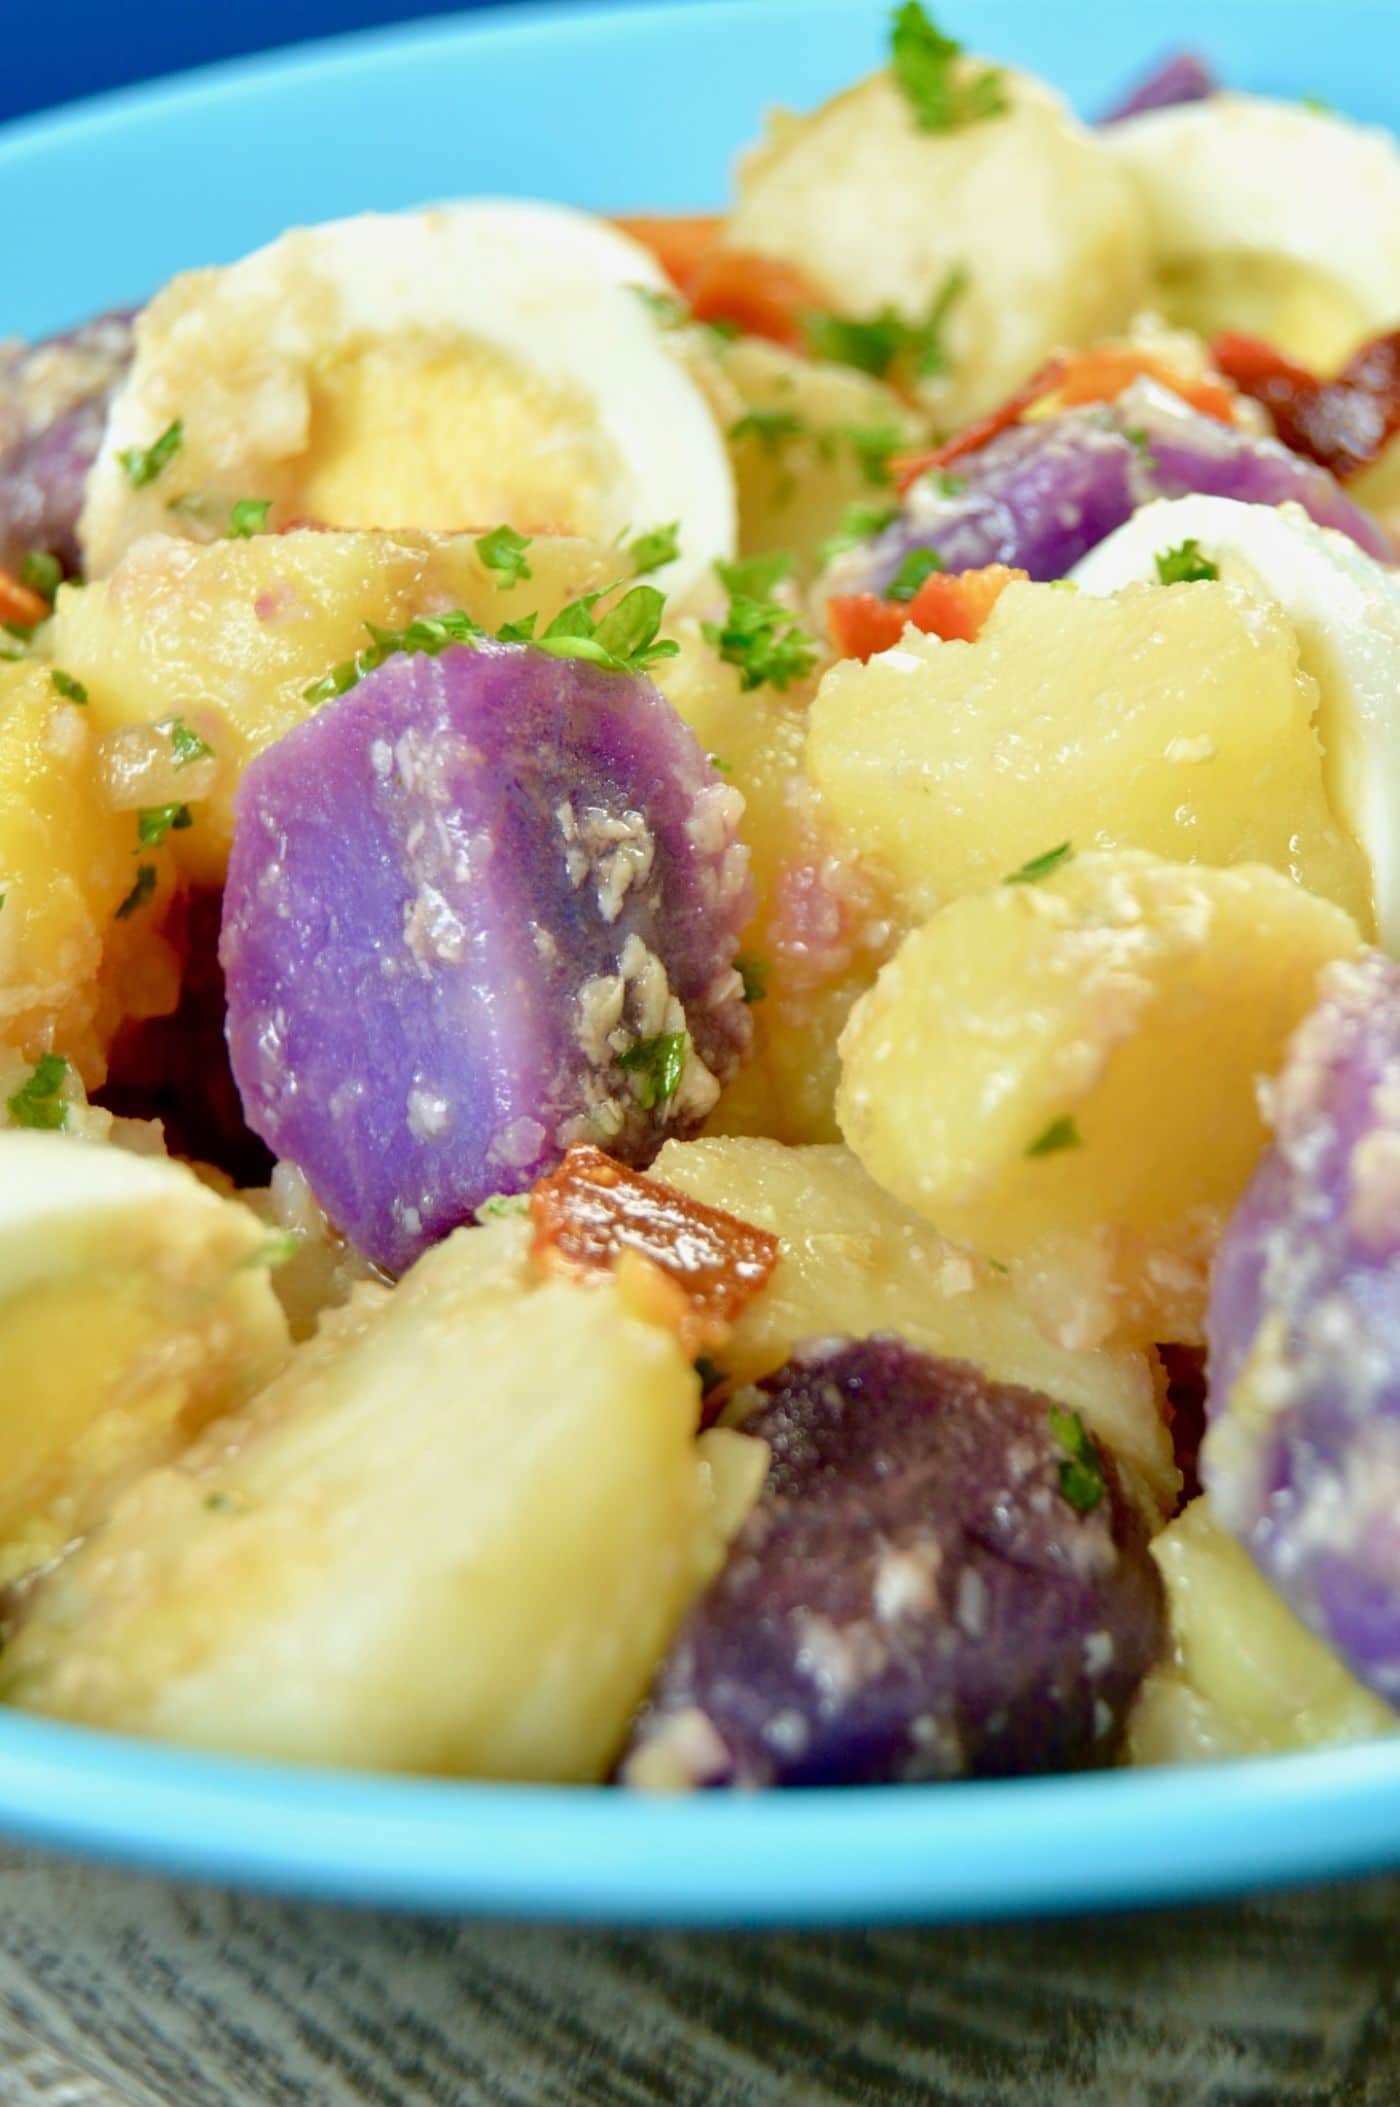 With three kinds of tender potatoes, this Creamy Mayo Free German Potato Salad is loaded with parmesan cheese and bacon. Perfect for a grilled dinner, summertime meal or to bring to a picnic.